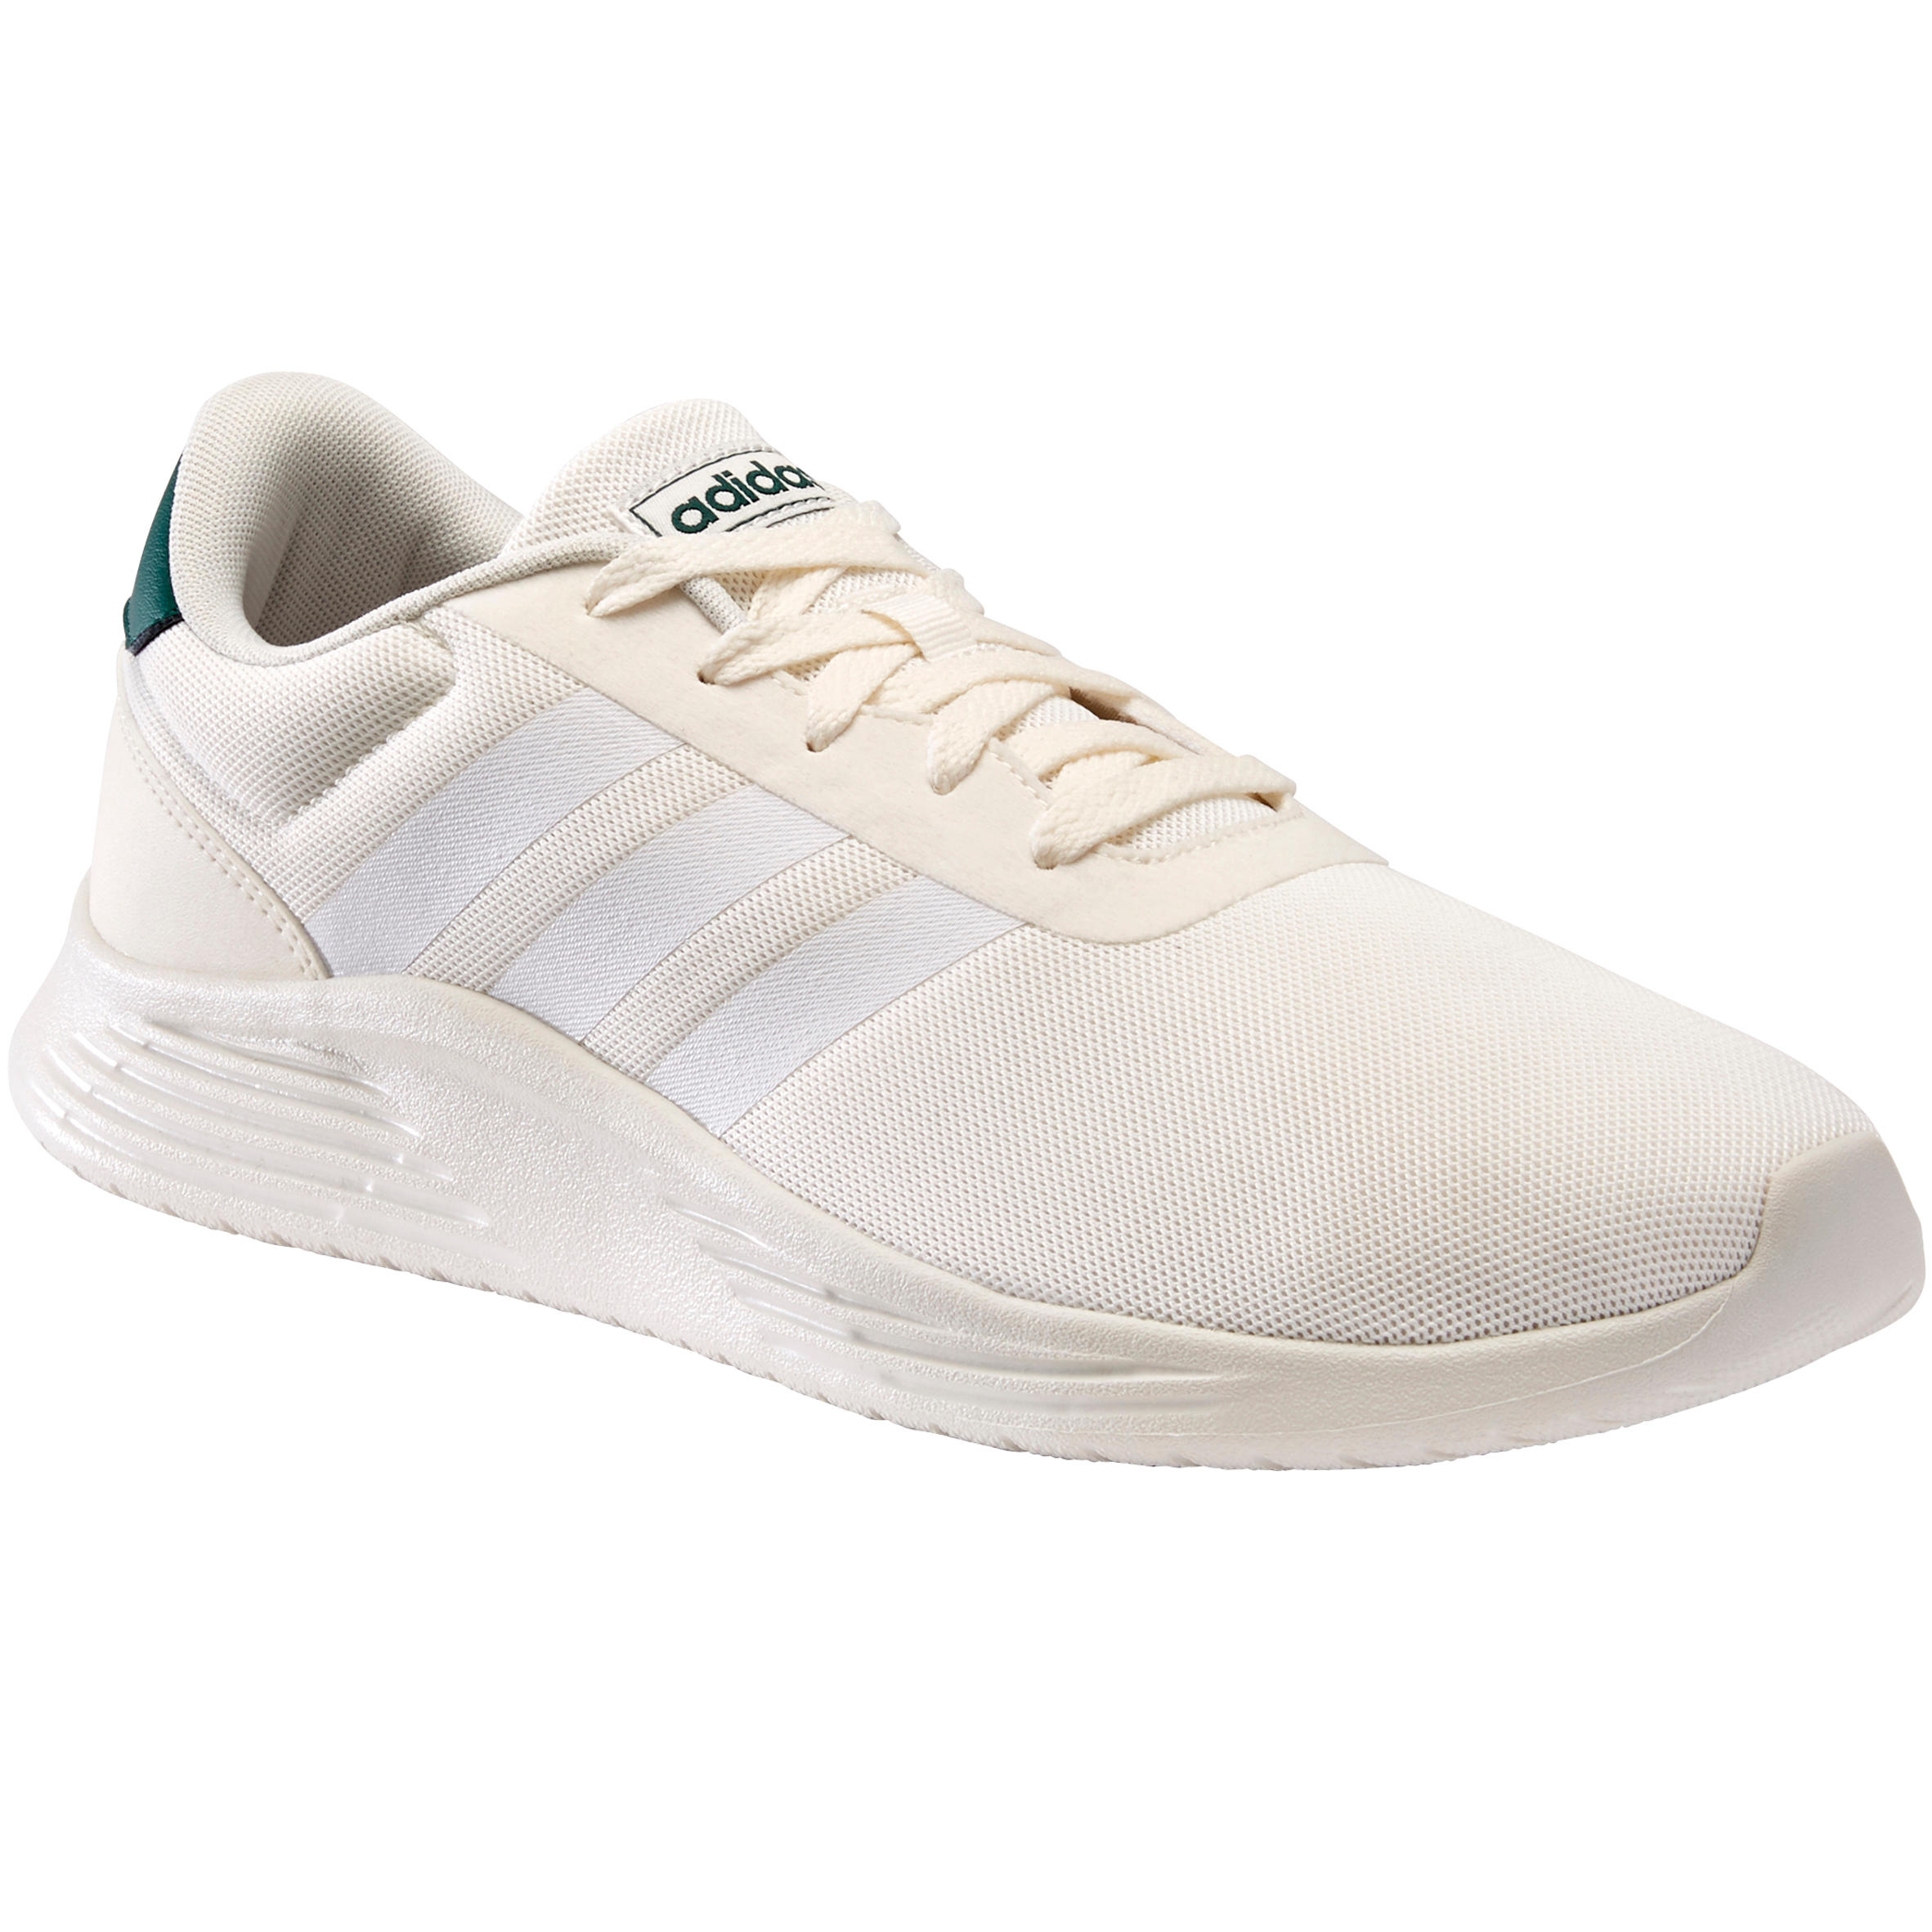 adidas lite racer mens trainers white